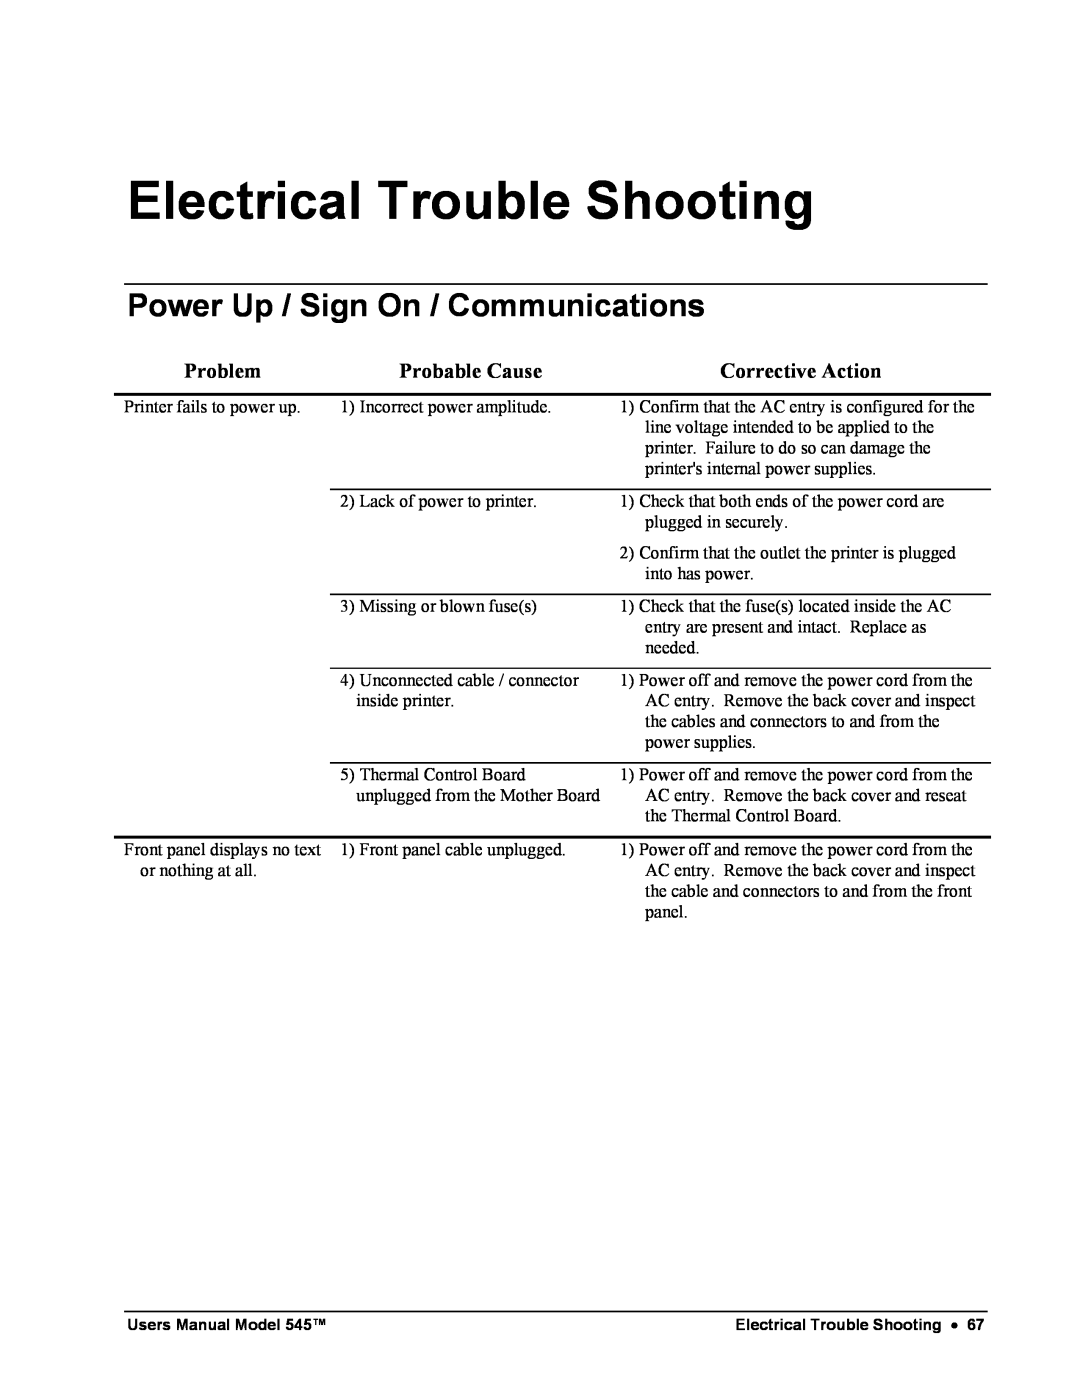 Paxar 545 Electrical Trouble Shooting, Power Up / Sign On / Communications, Problem, Probable Cause, Corrective Action 